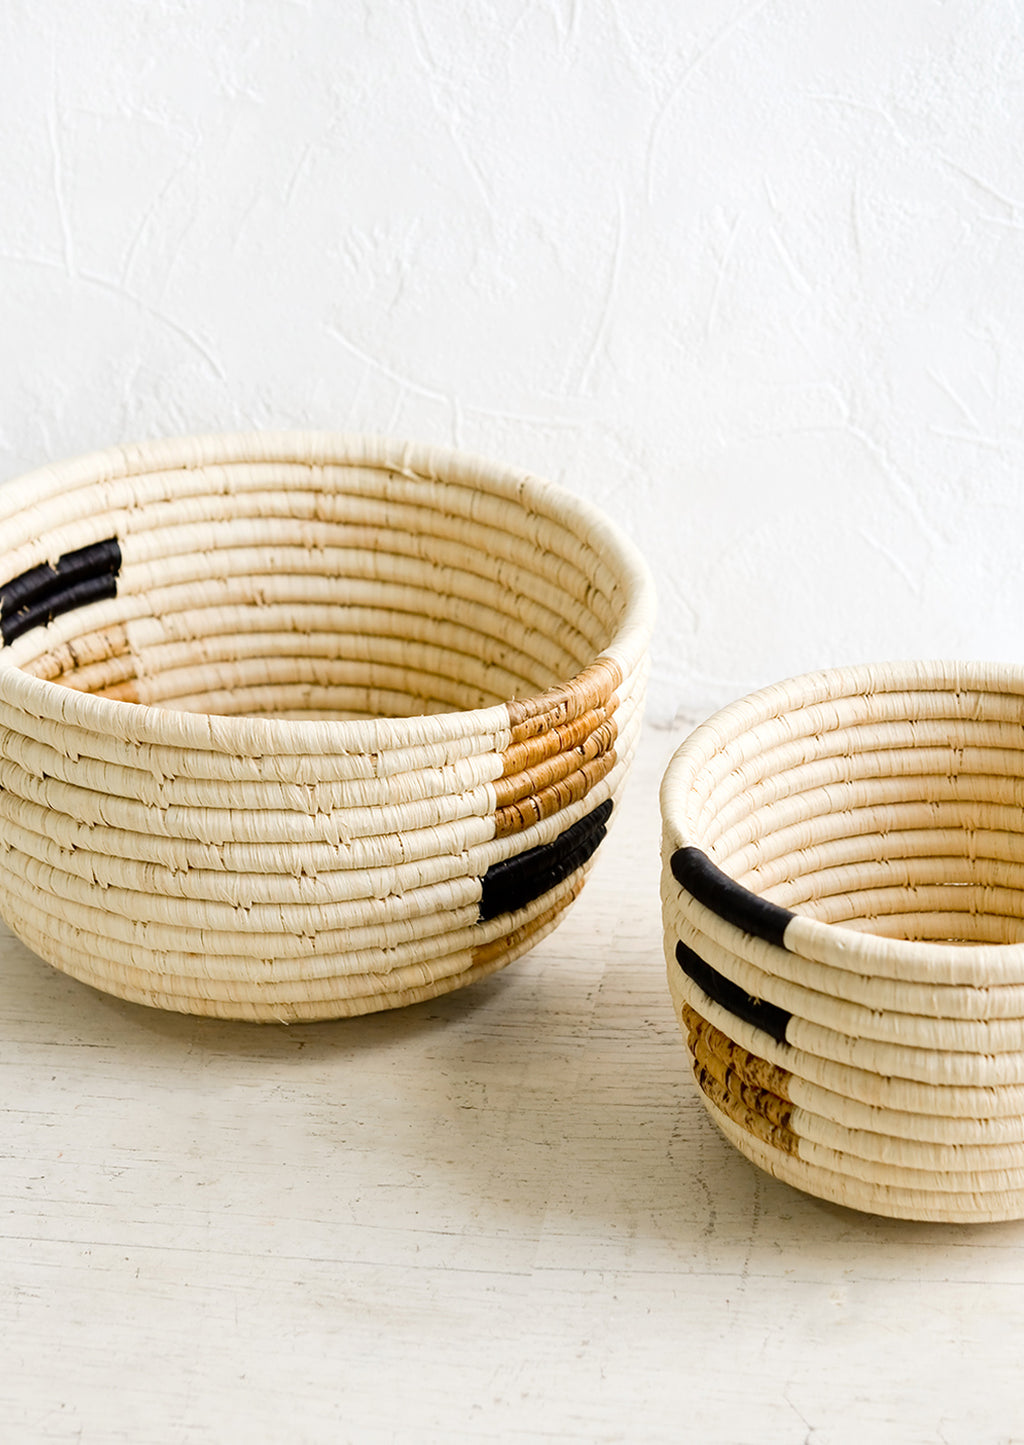 2: Two raffia catchall baskets in natural palette and incremental sizes.